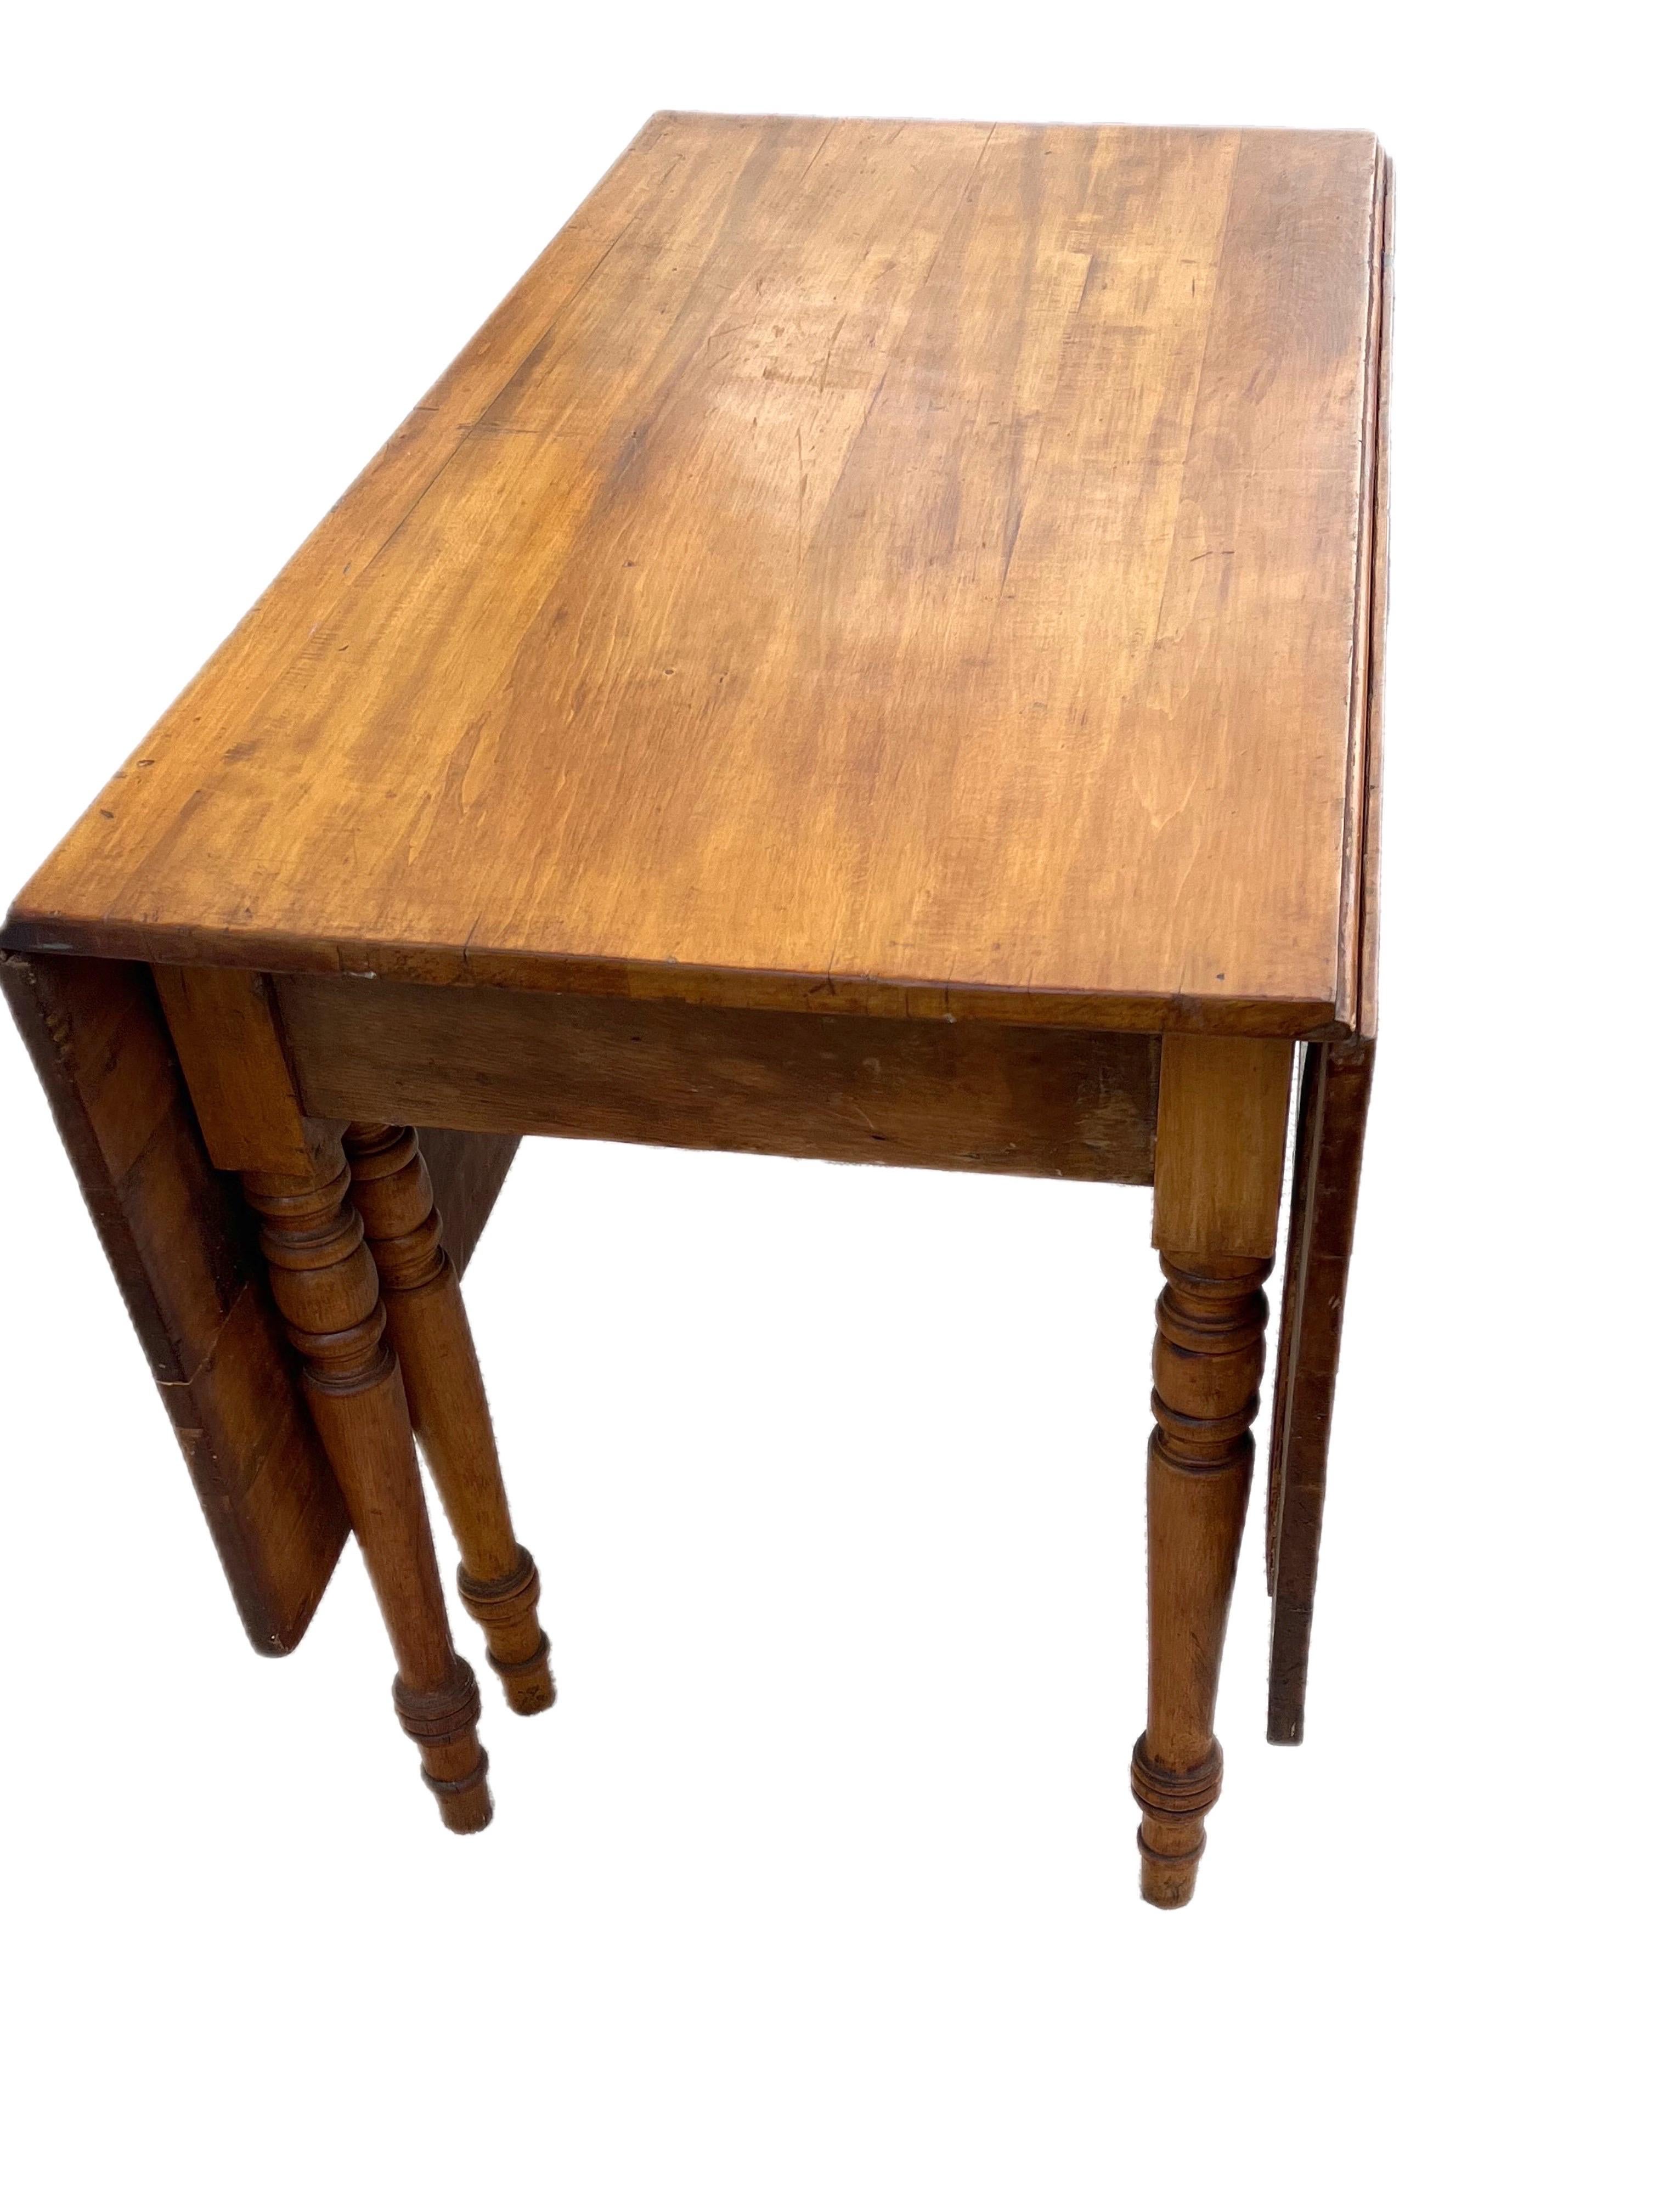 Rustic Late 19th Century Antique Farmhouse Solid Chestnut Gateleg Table For Sale